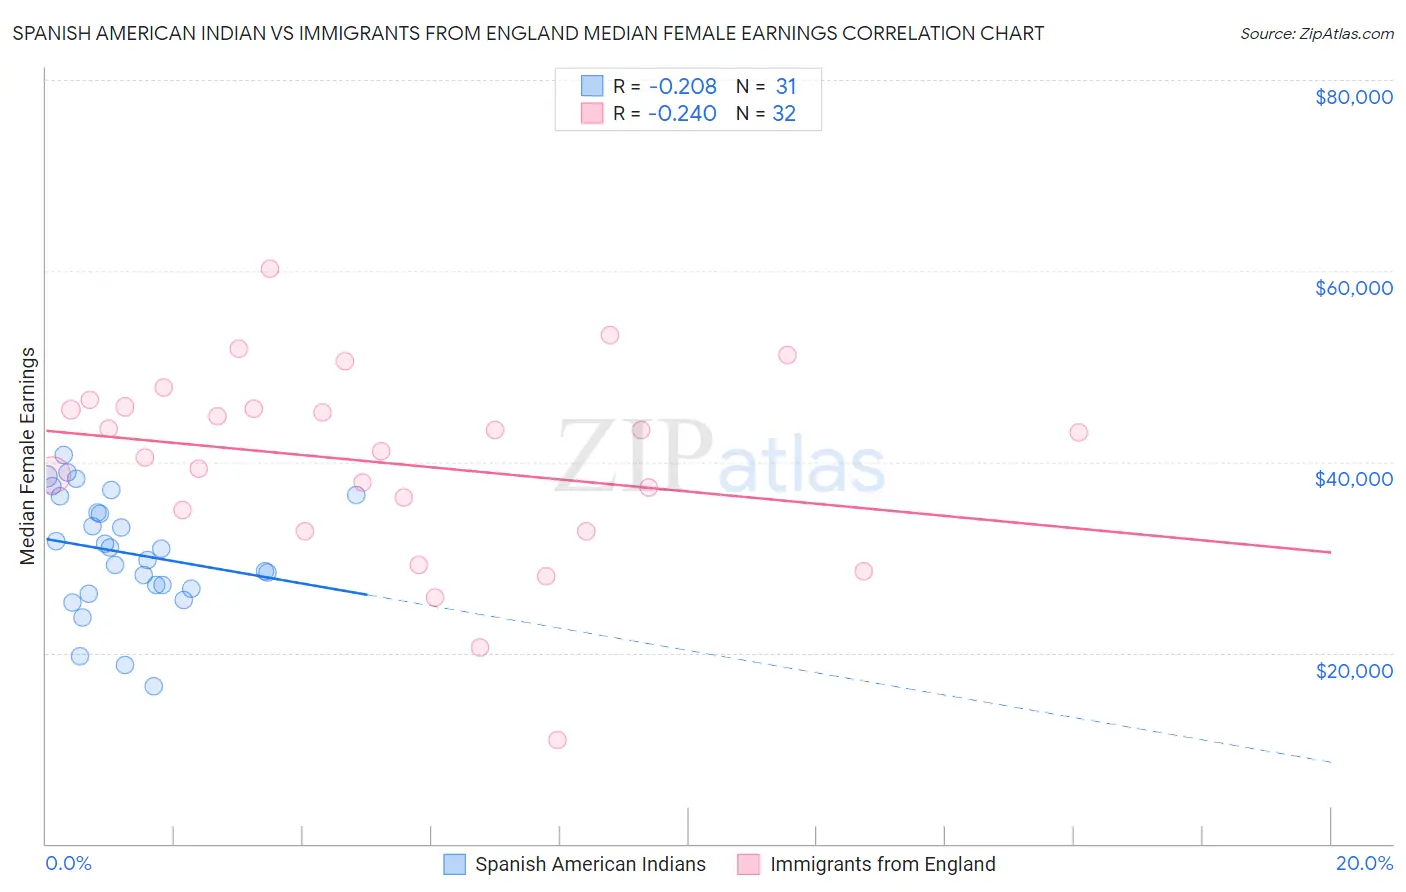 Spanish American Indian vs Immigrants from England Median Female Earnings